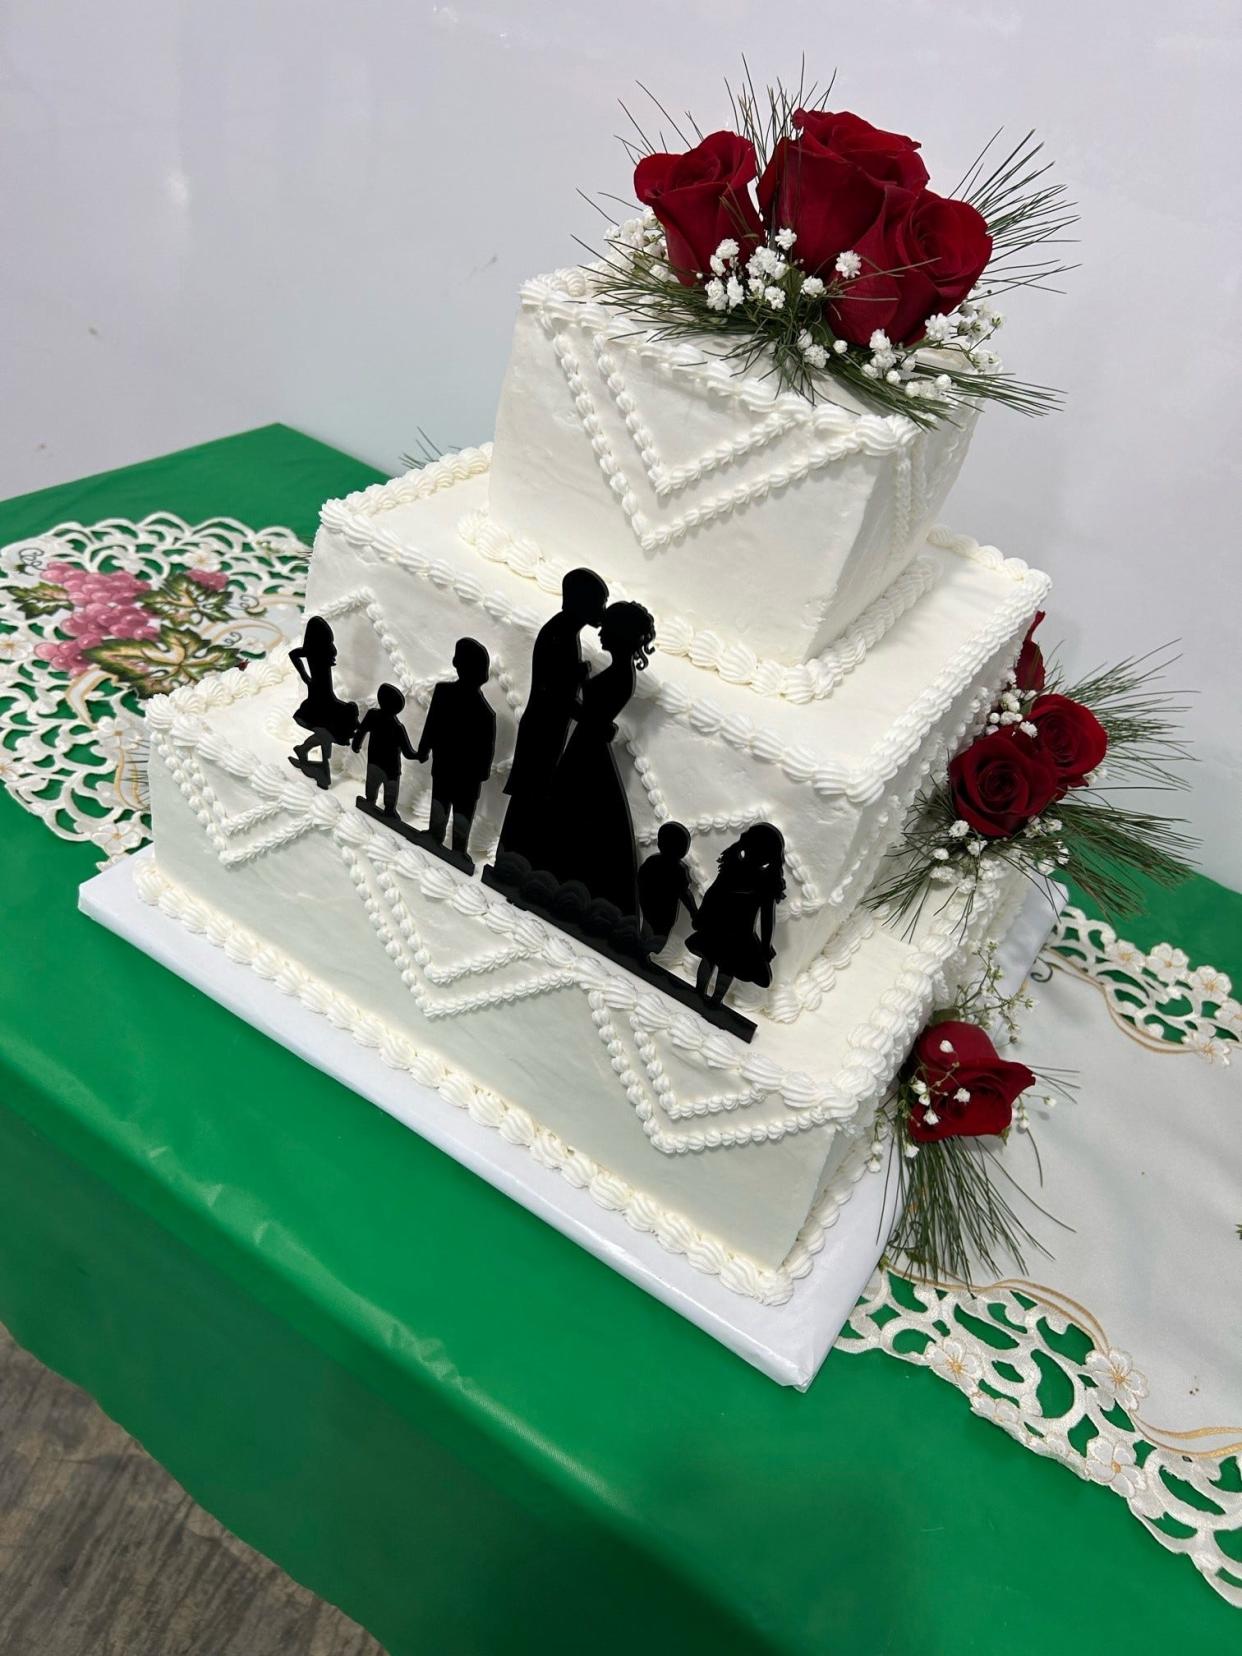 A beautiful wedding cake to celebrate the marriage of Susan and Ervin.